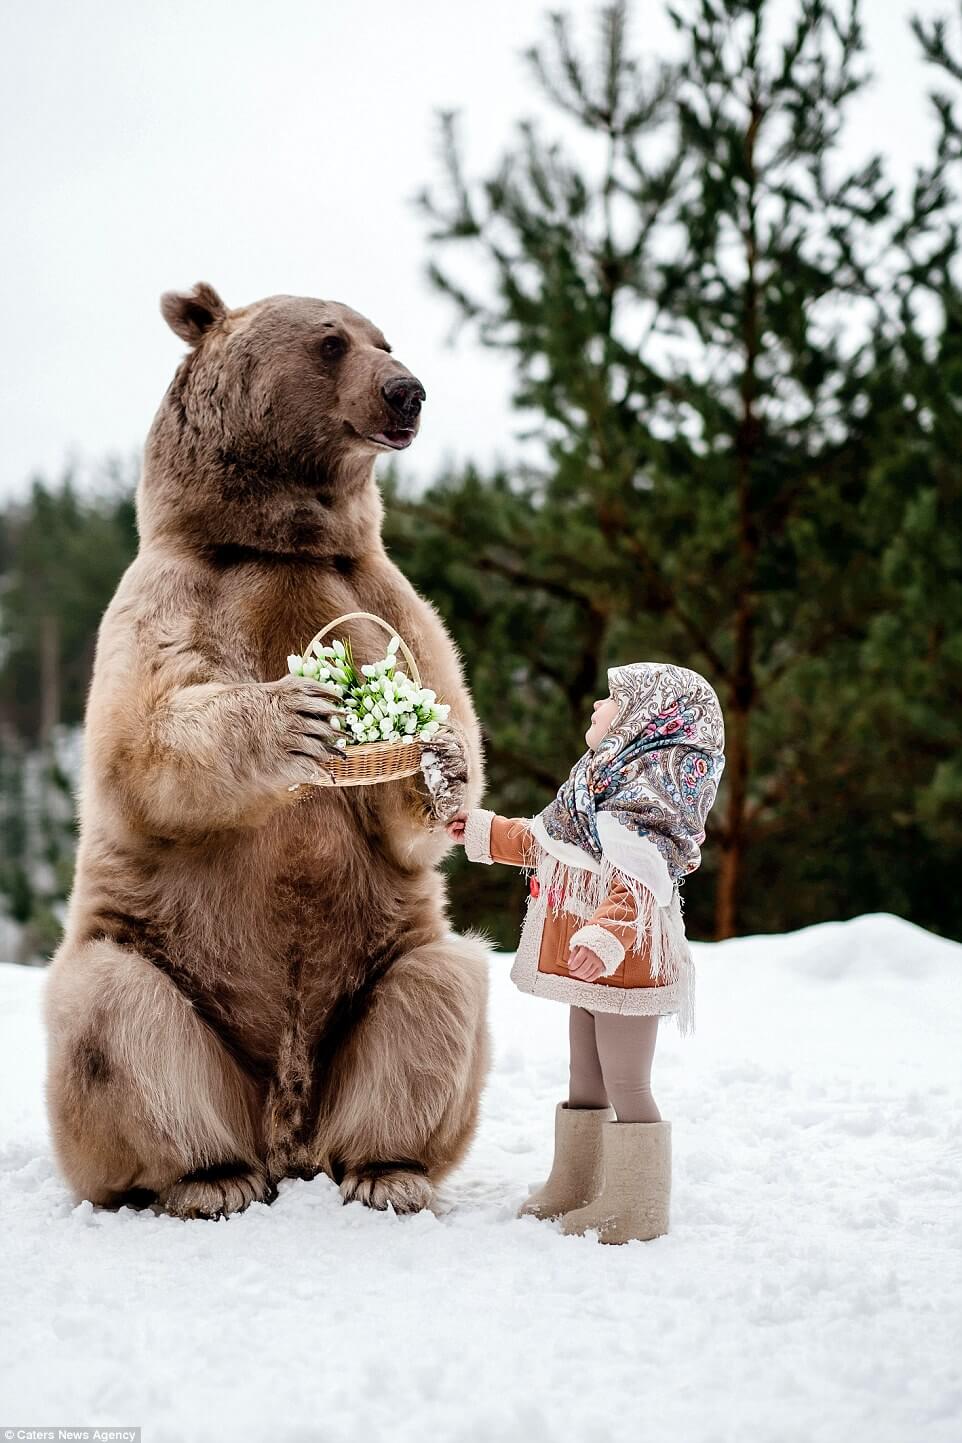 Astounding Photos Of Children Posing With Huge Grizzly Bear